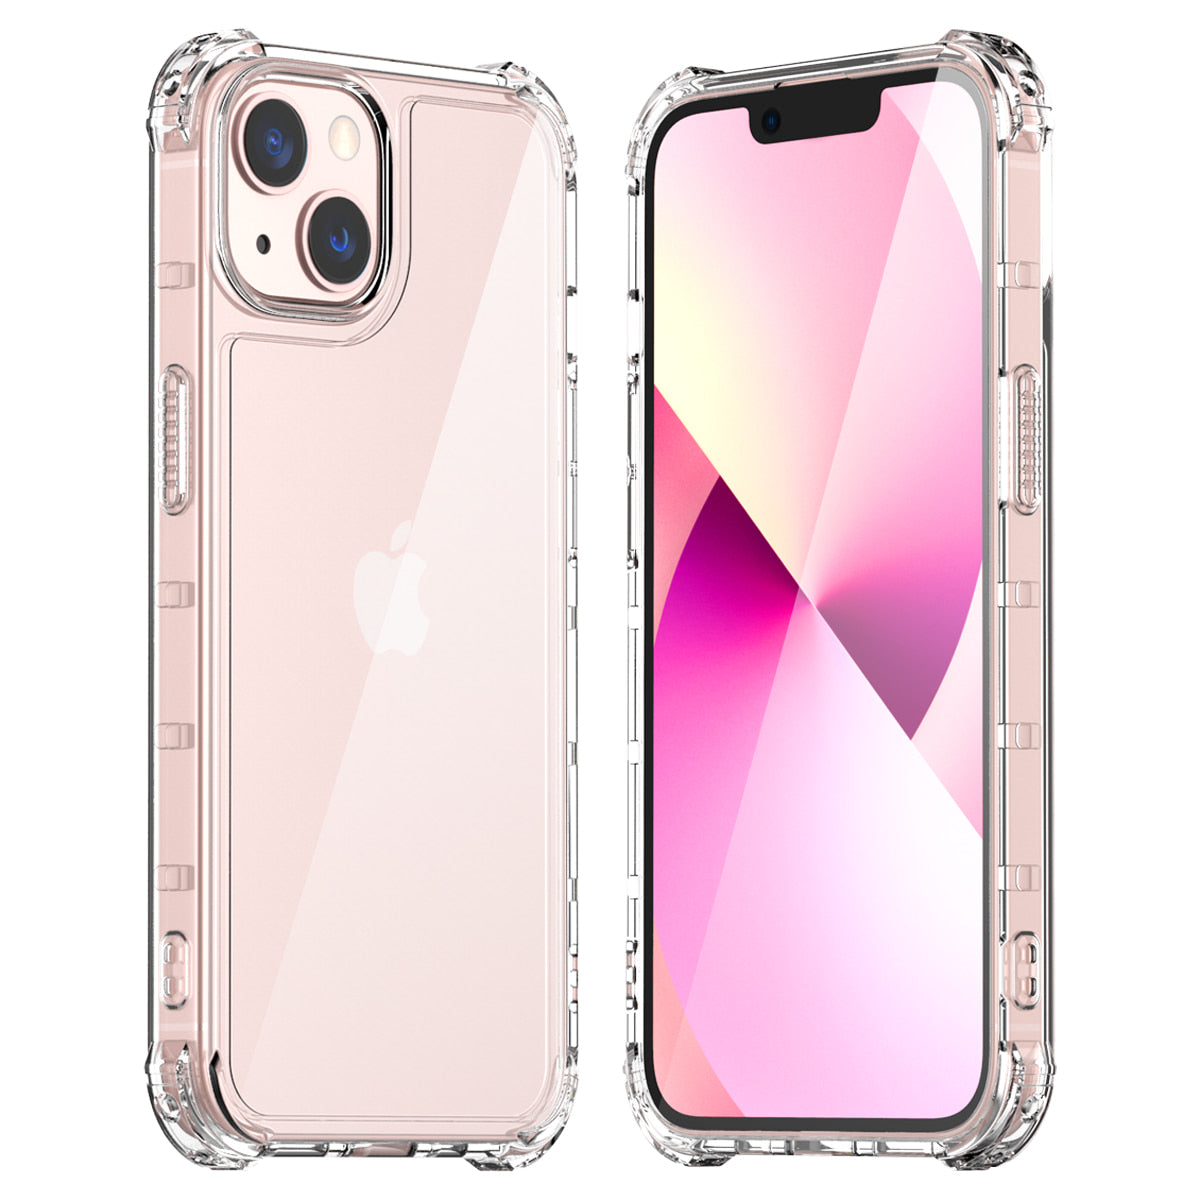 Araree Flexield Tpu Case For Apple iPhone 13 - Clear